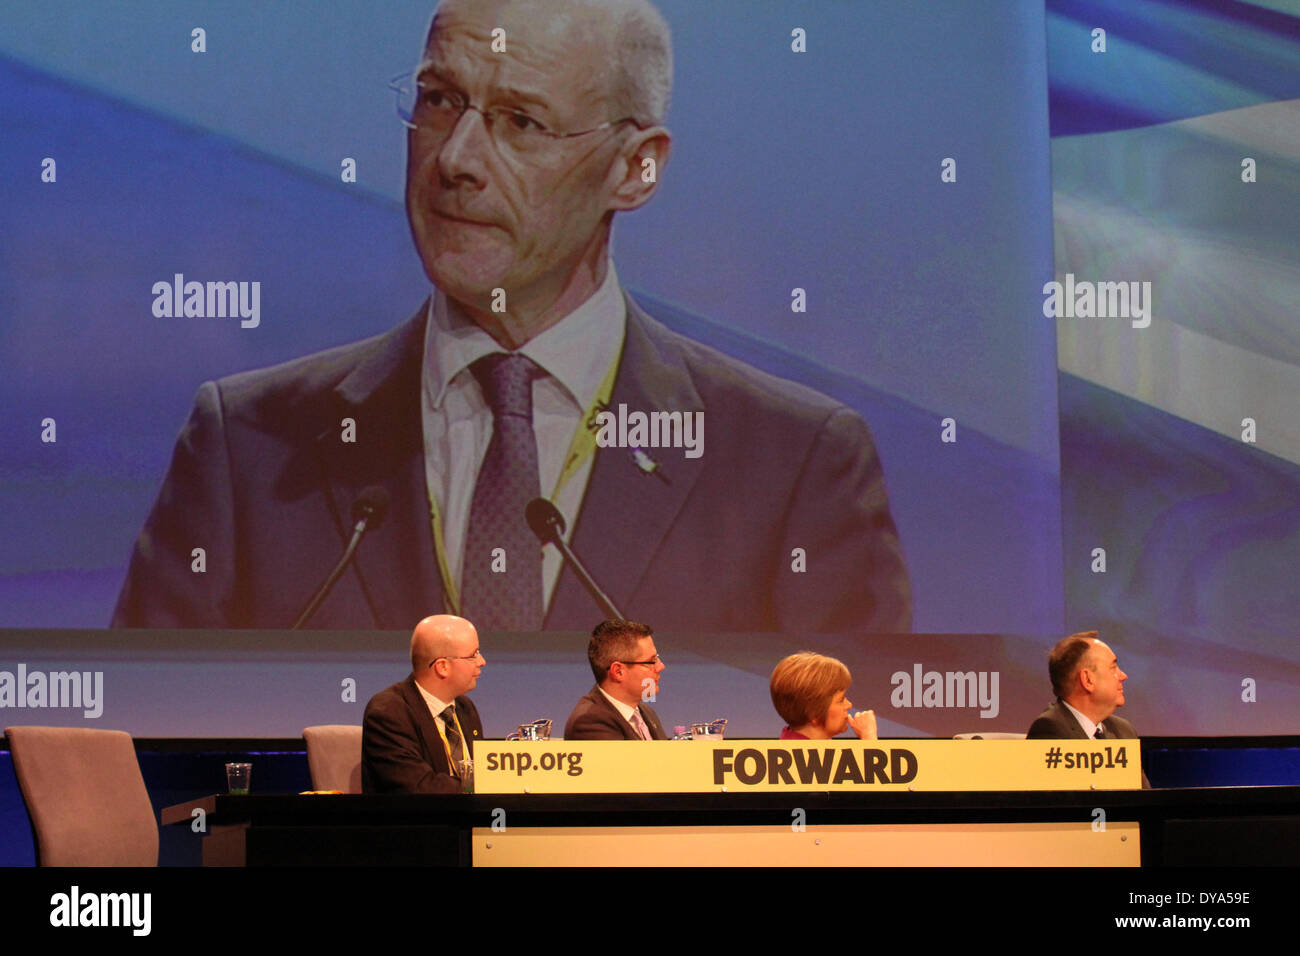 Mr John Swinney speaking at the SNP Spring Conference at the Exhibition and Conference Centre (AECC) 2014. This is the last formal assembly before the referendum on September 18th campaigning for a Yes vote for Scotland’s independence.  The conference, marking the 80th Anniversary of the formation of the party,  follows the publication of ‘Scotland’s Future, a detailed blueprint for an Scottish National Party Government to deliver using the new powers. Stock Photo